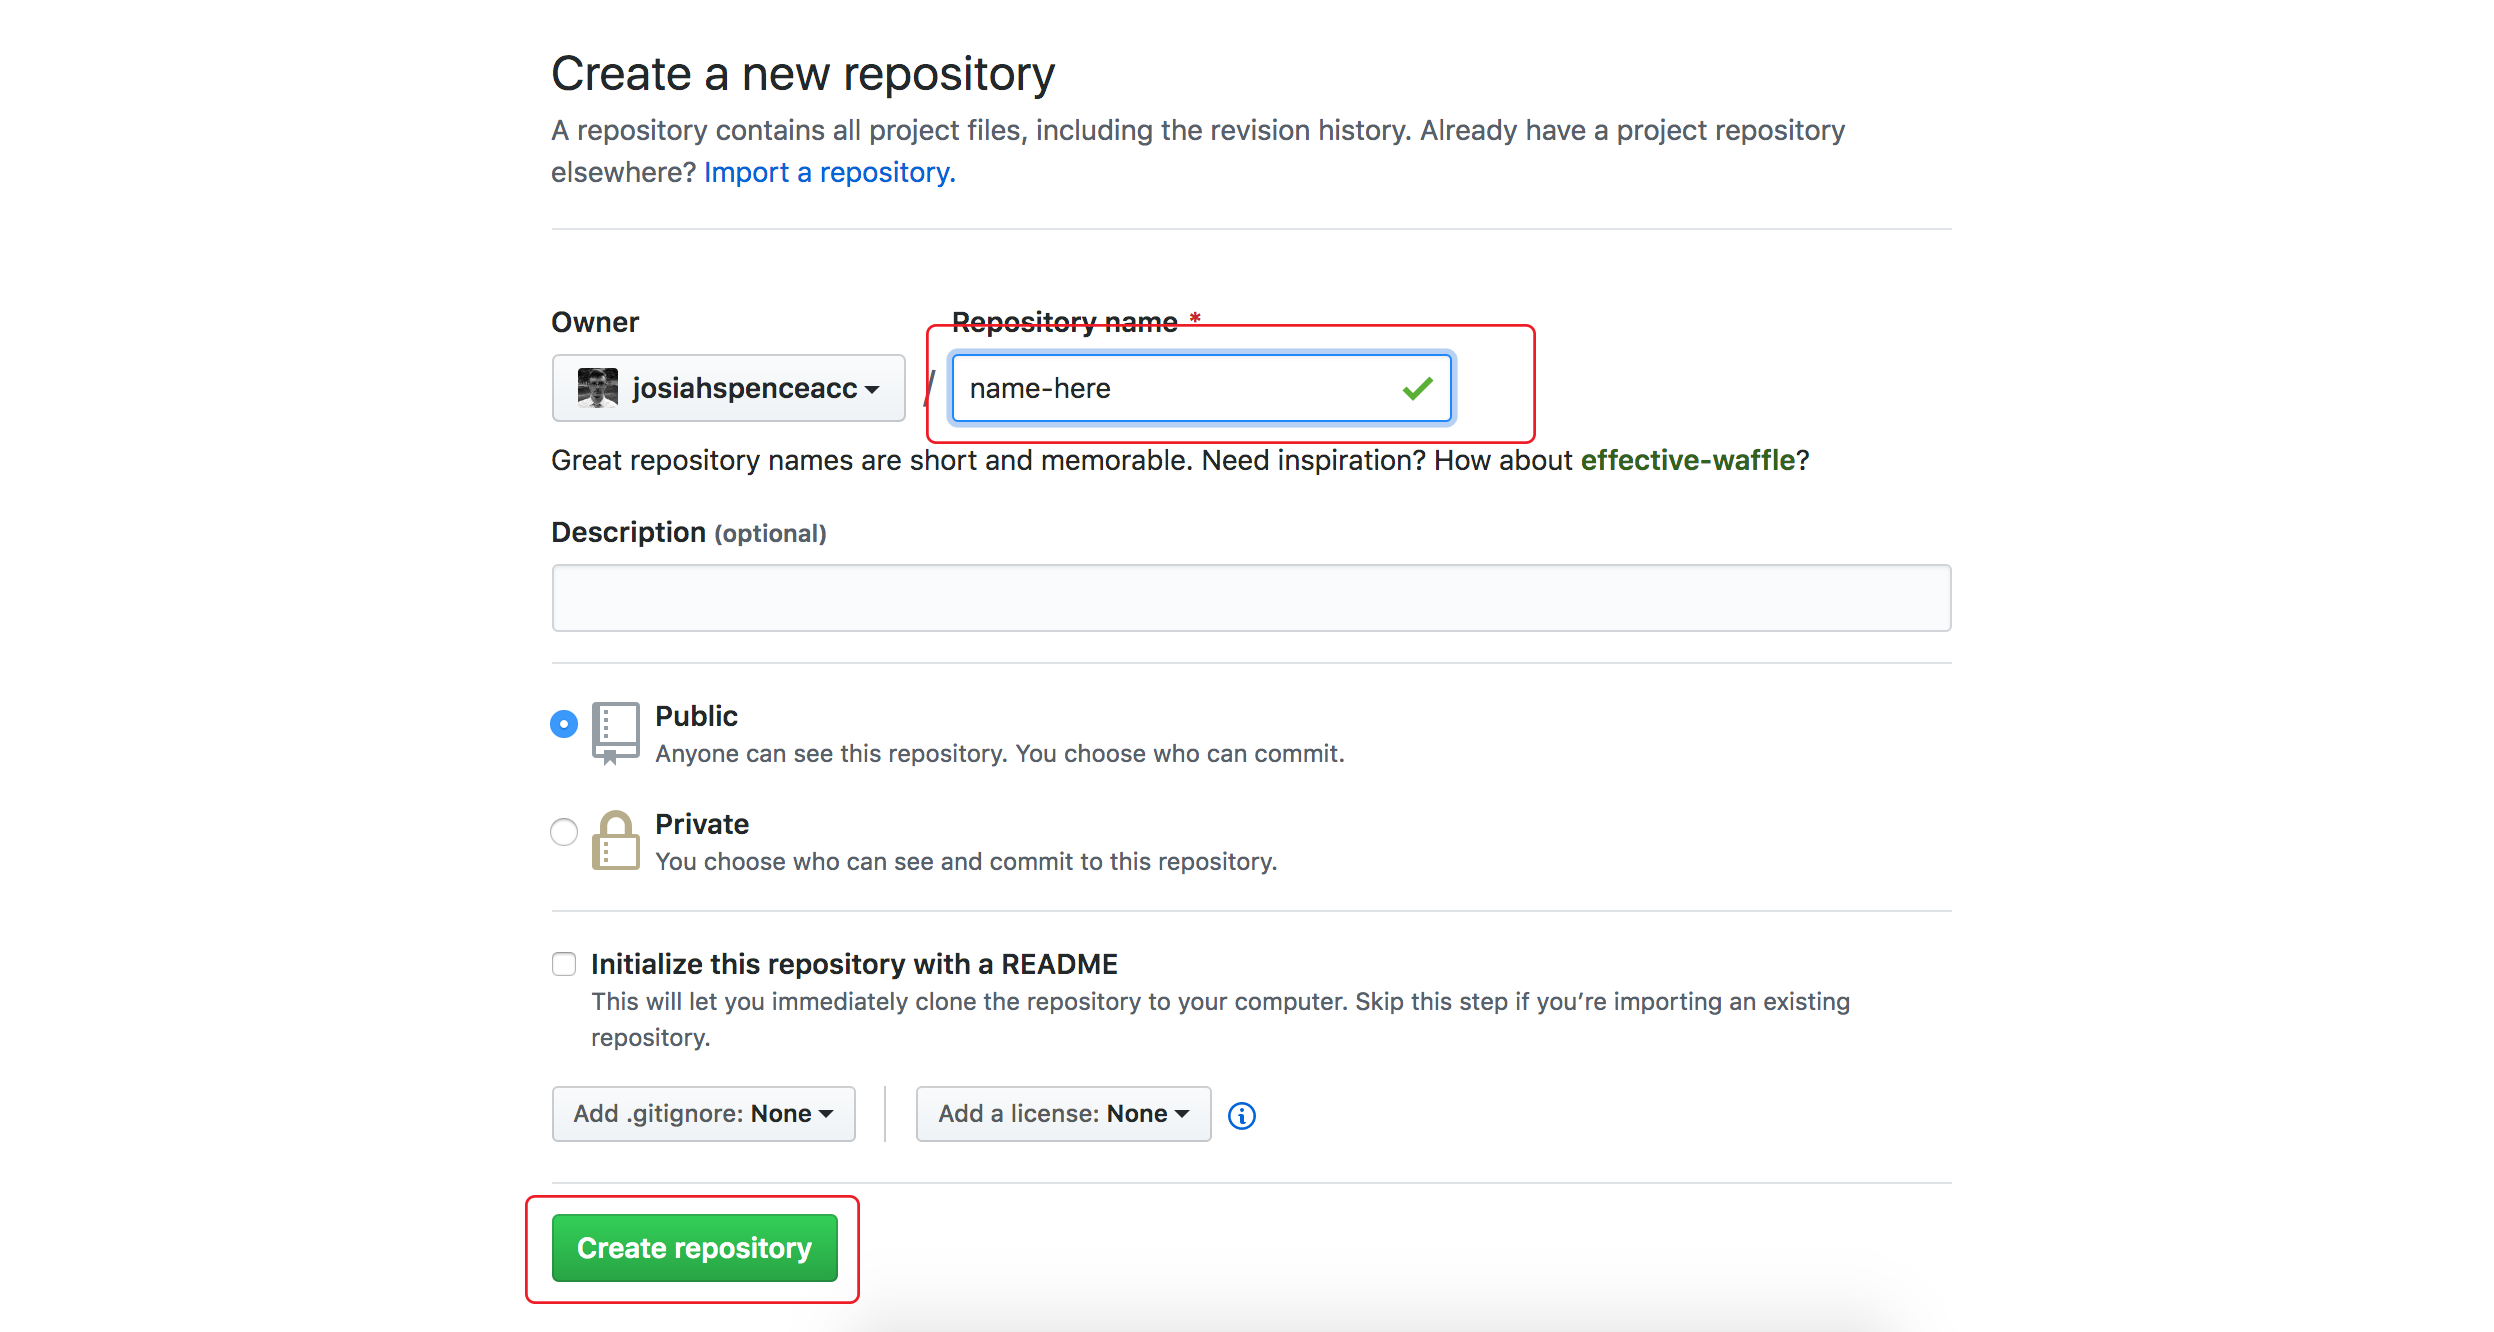 How to create a new repository